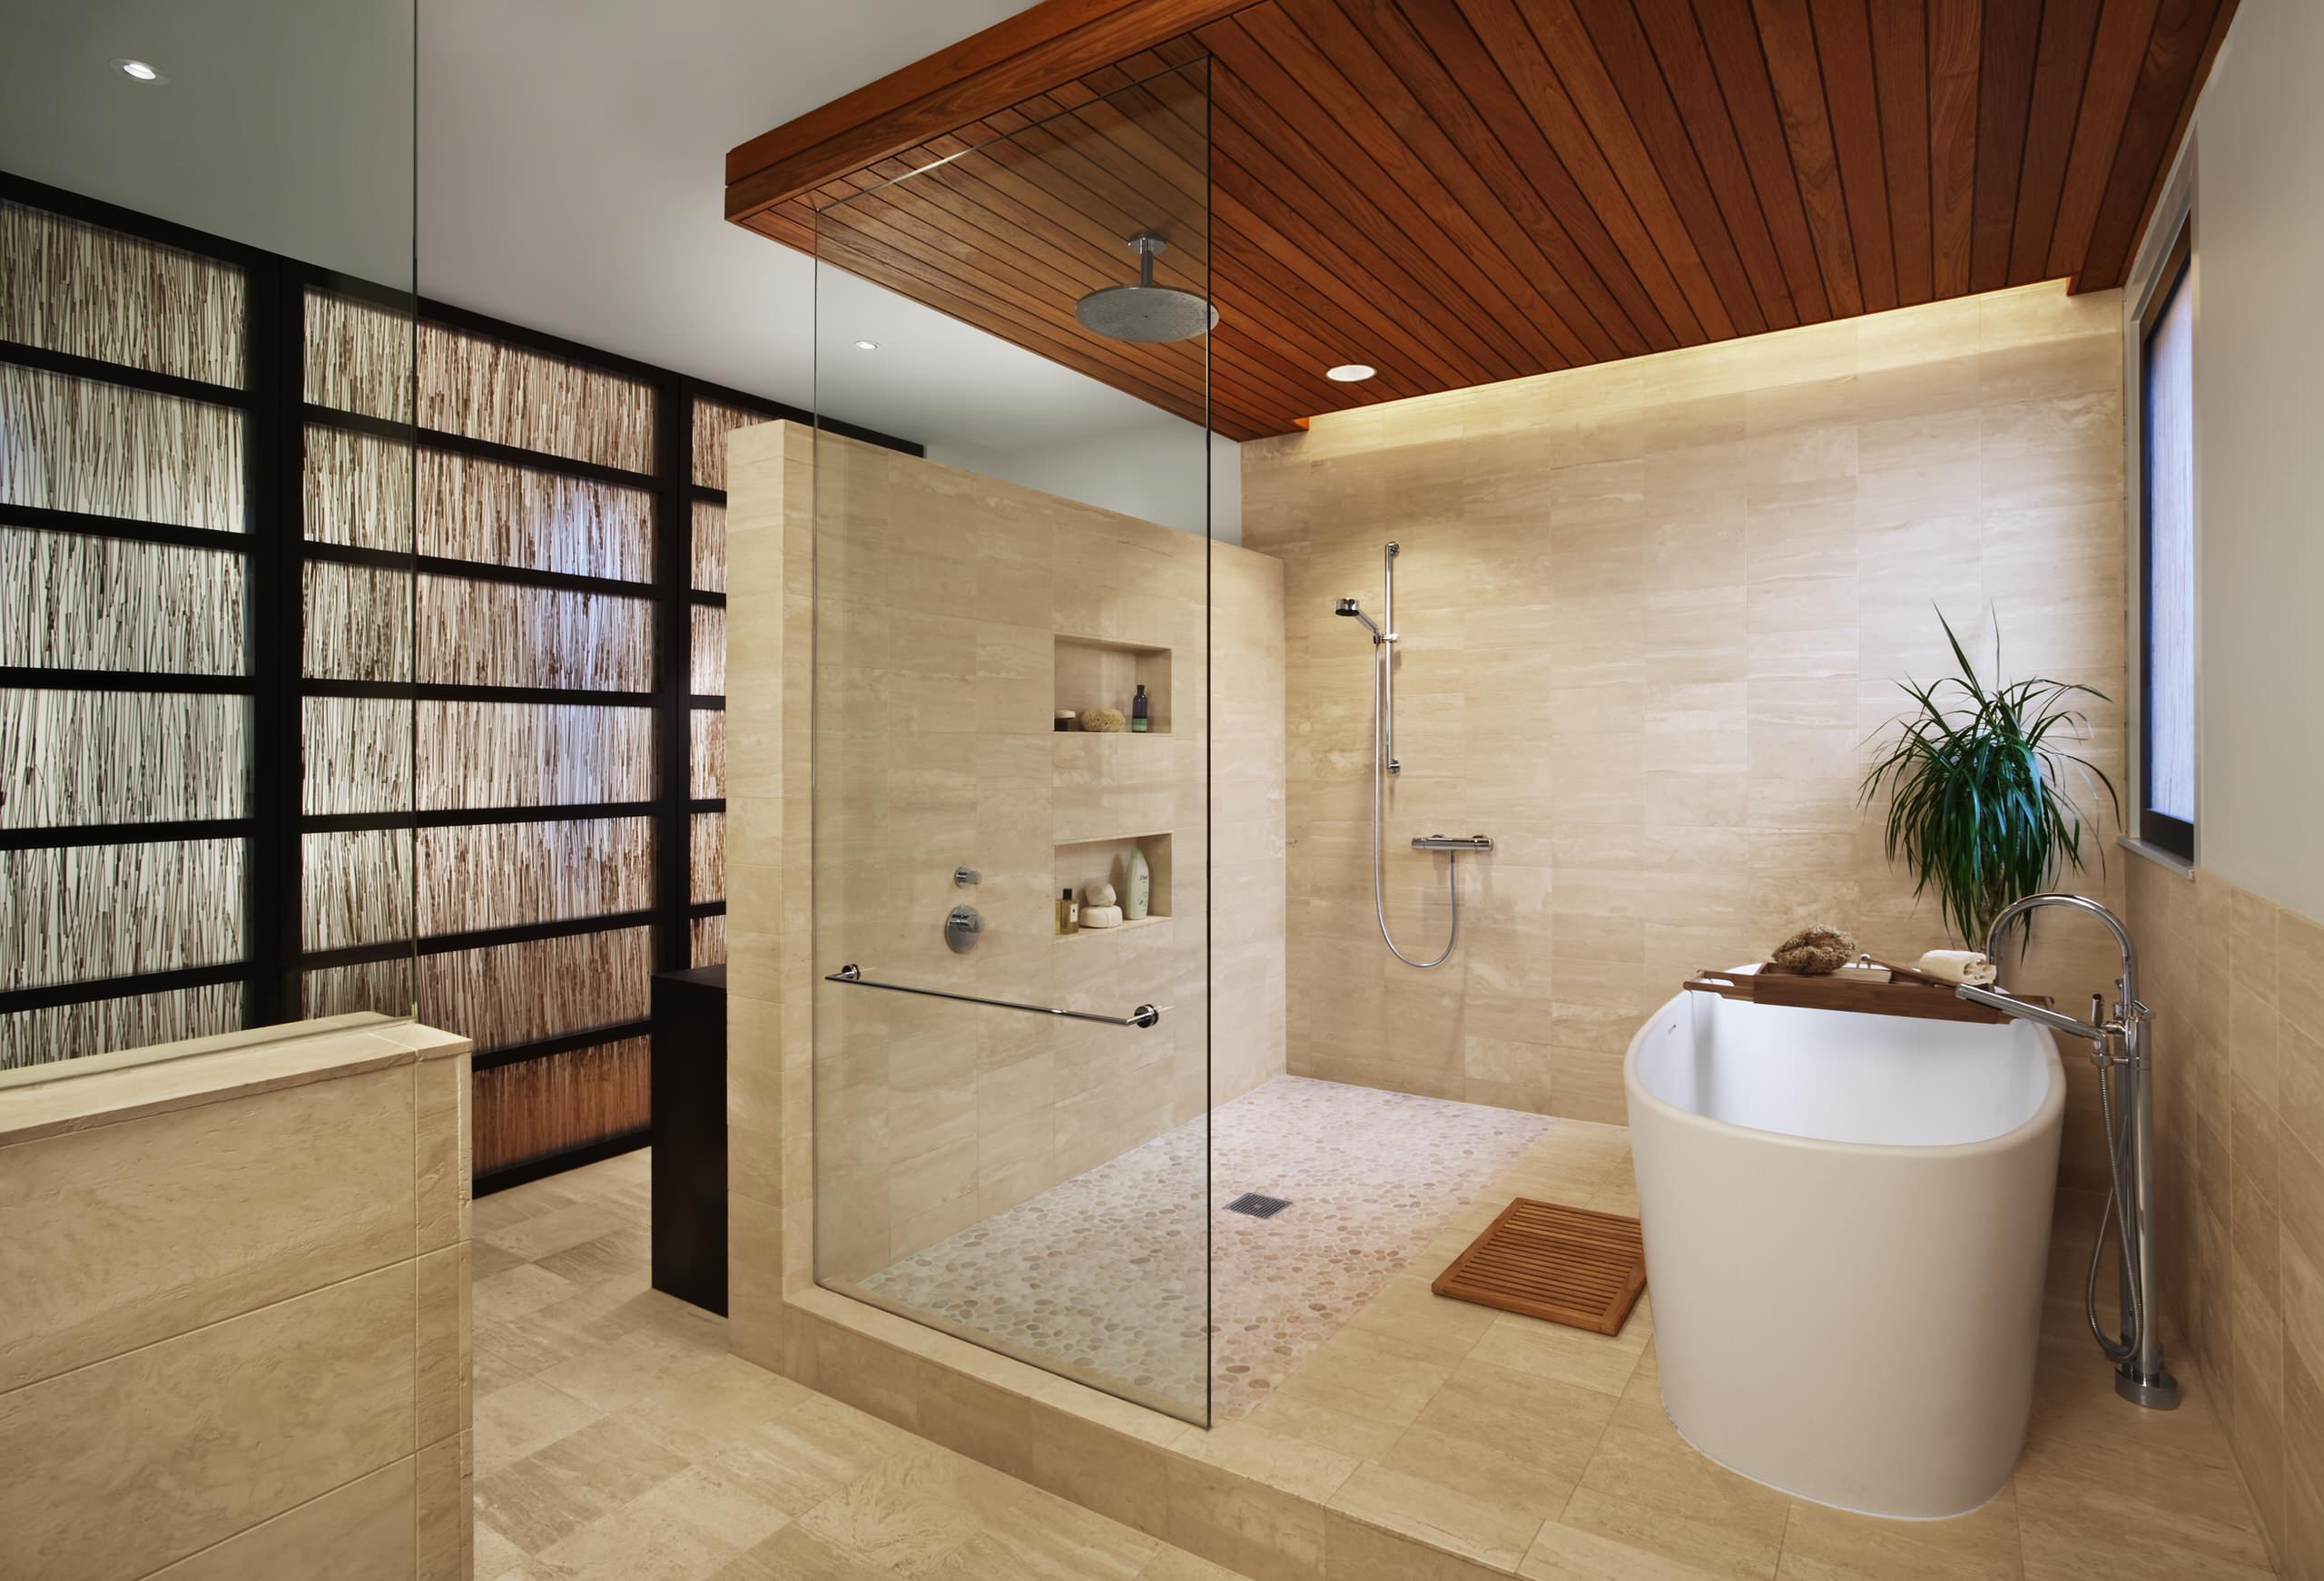 75 Beautiful Stone Tile Bathroom Pictures Ideas August 2021 Houzz